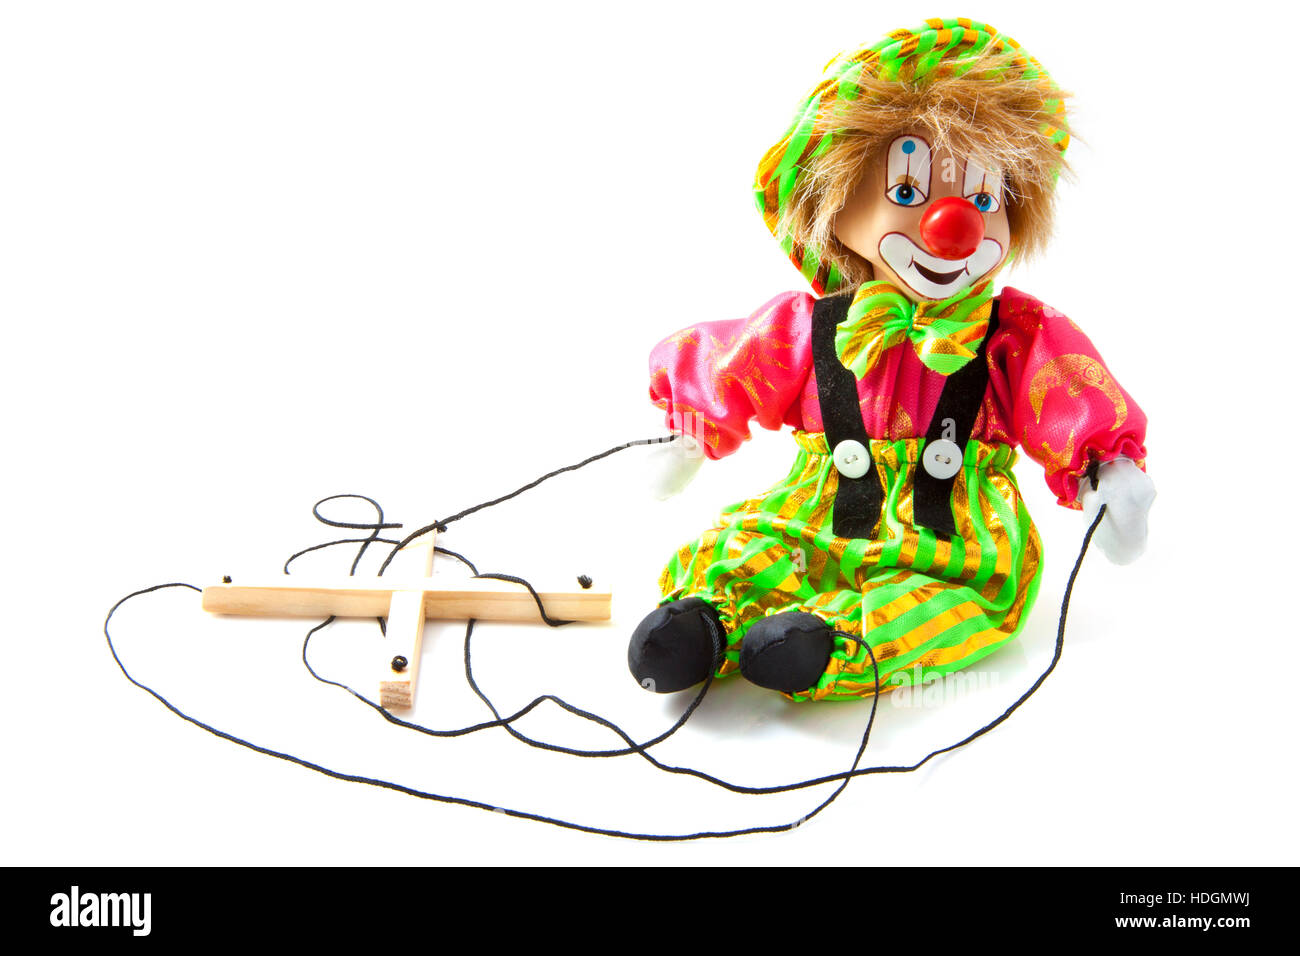 Fancy happy marionette puppet on a white background Stock Photo